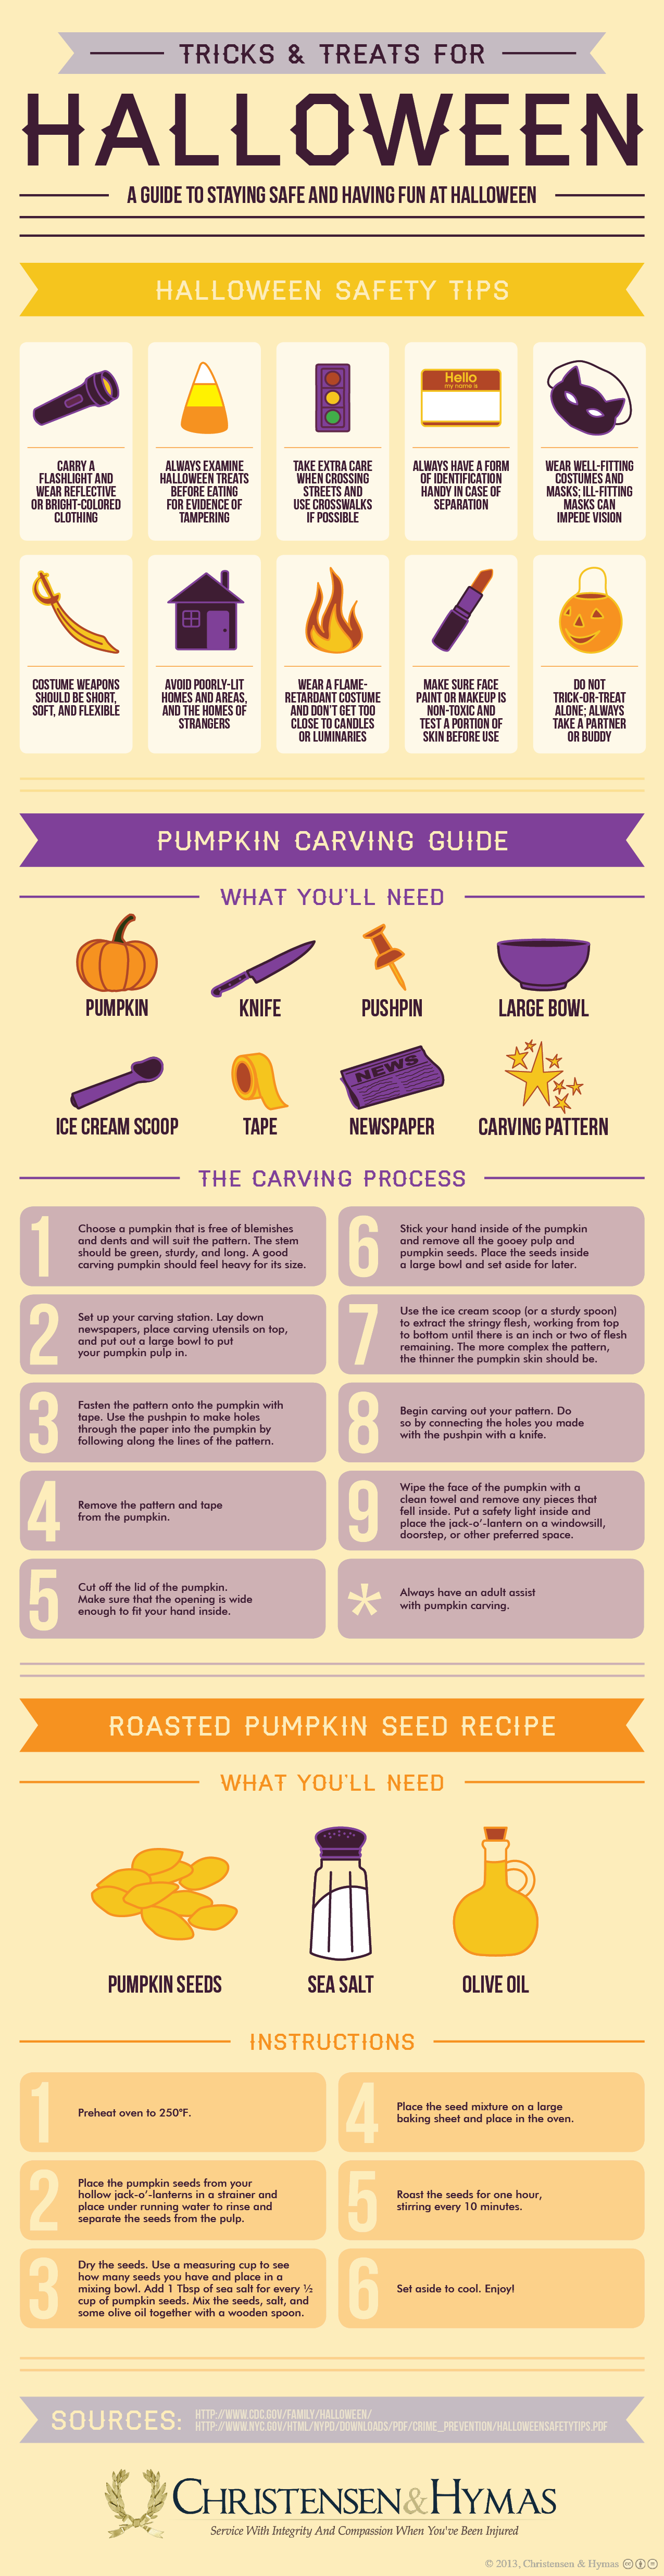 Ultimate Pumkin Carving Guide + Safety Tips